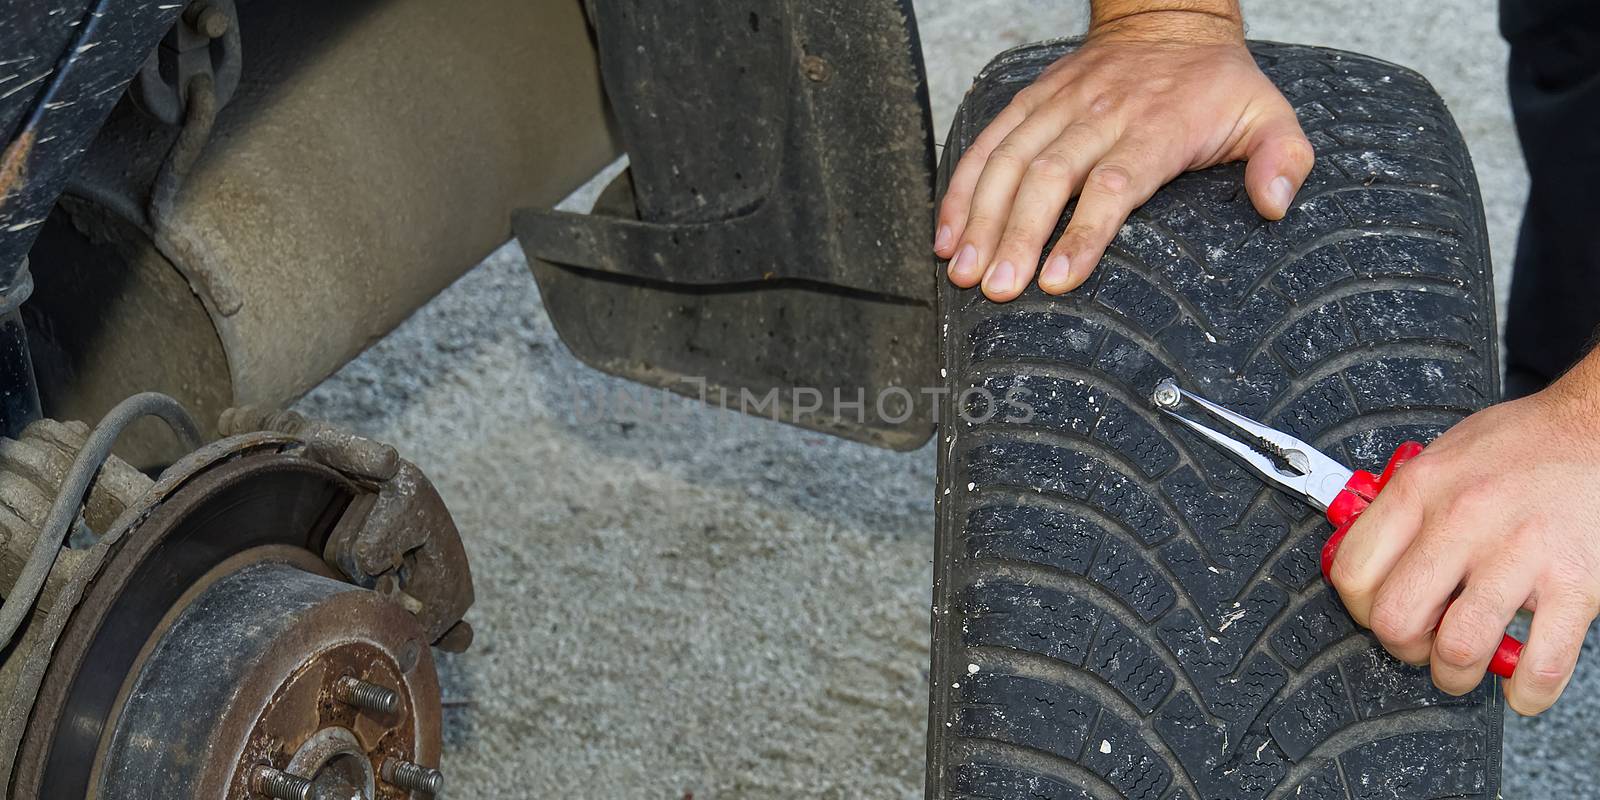 screw in car flat tire. mechanic repair a tire puncture from a nail or screw.